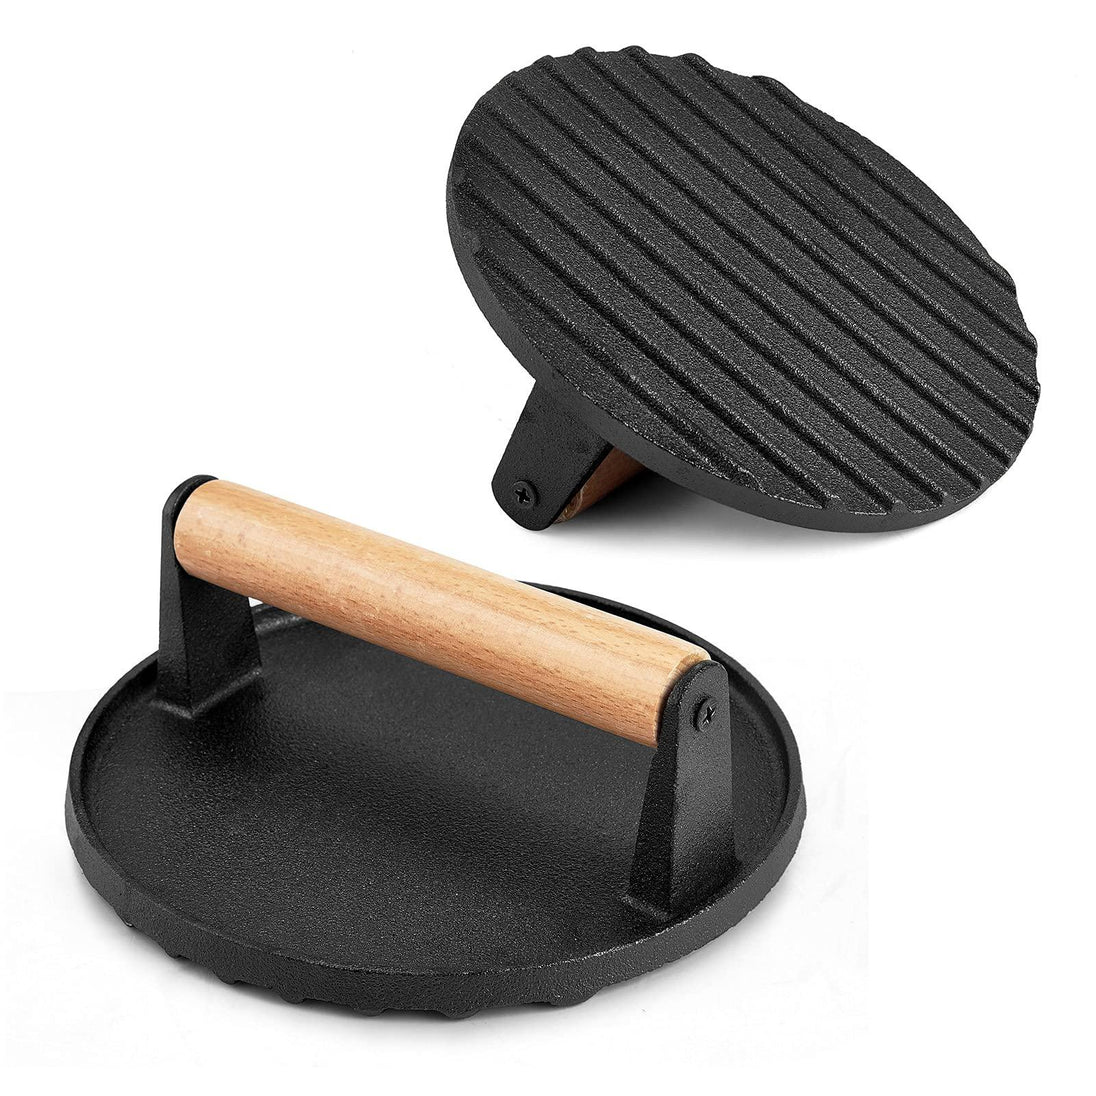 Buy Heavy Duty Round / Rectangle Cast Iron Grill Burger Press Pre-Seasoned Steak Griddle BBQ Grilling discounted | Products On Sale Australia